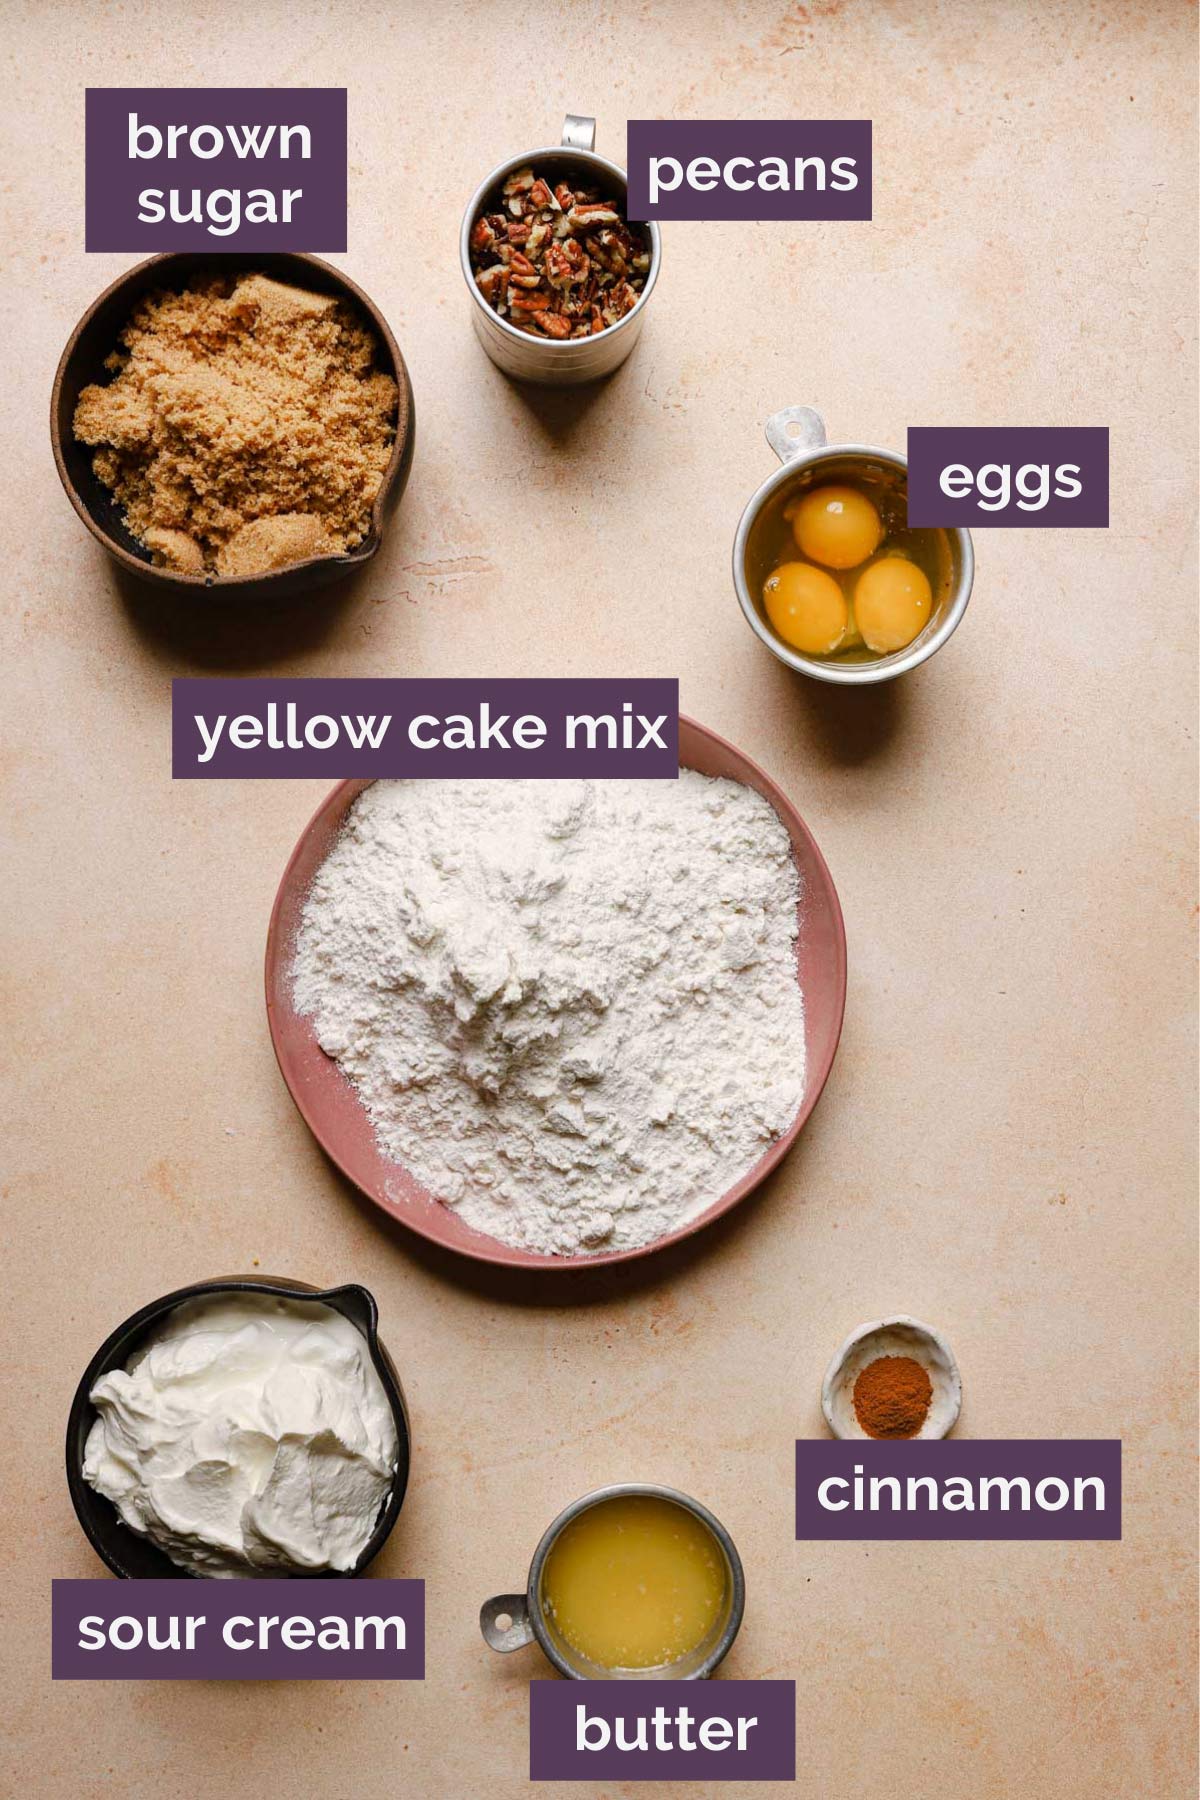 Ingredients for coffee cake using a yellow cake mix prepped and labeled.